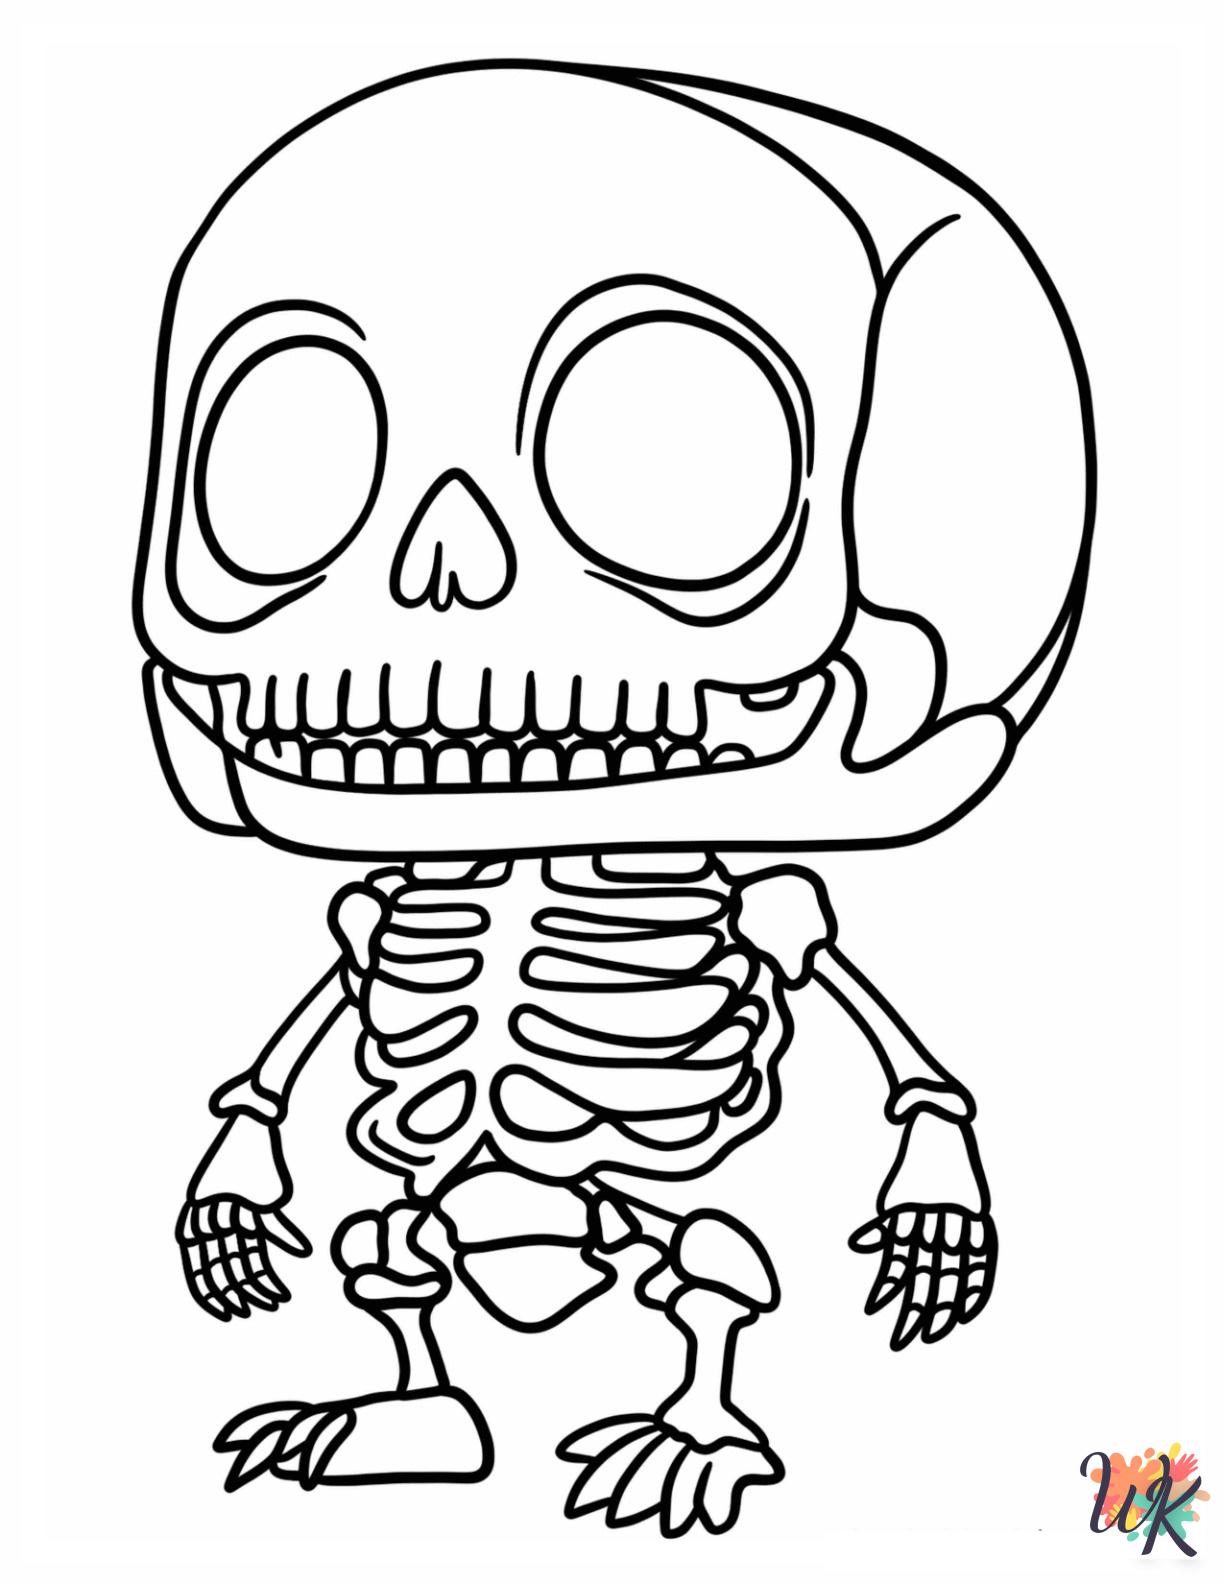 Skeleton free coloring pages